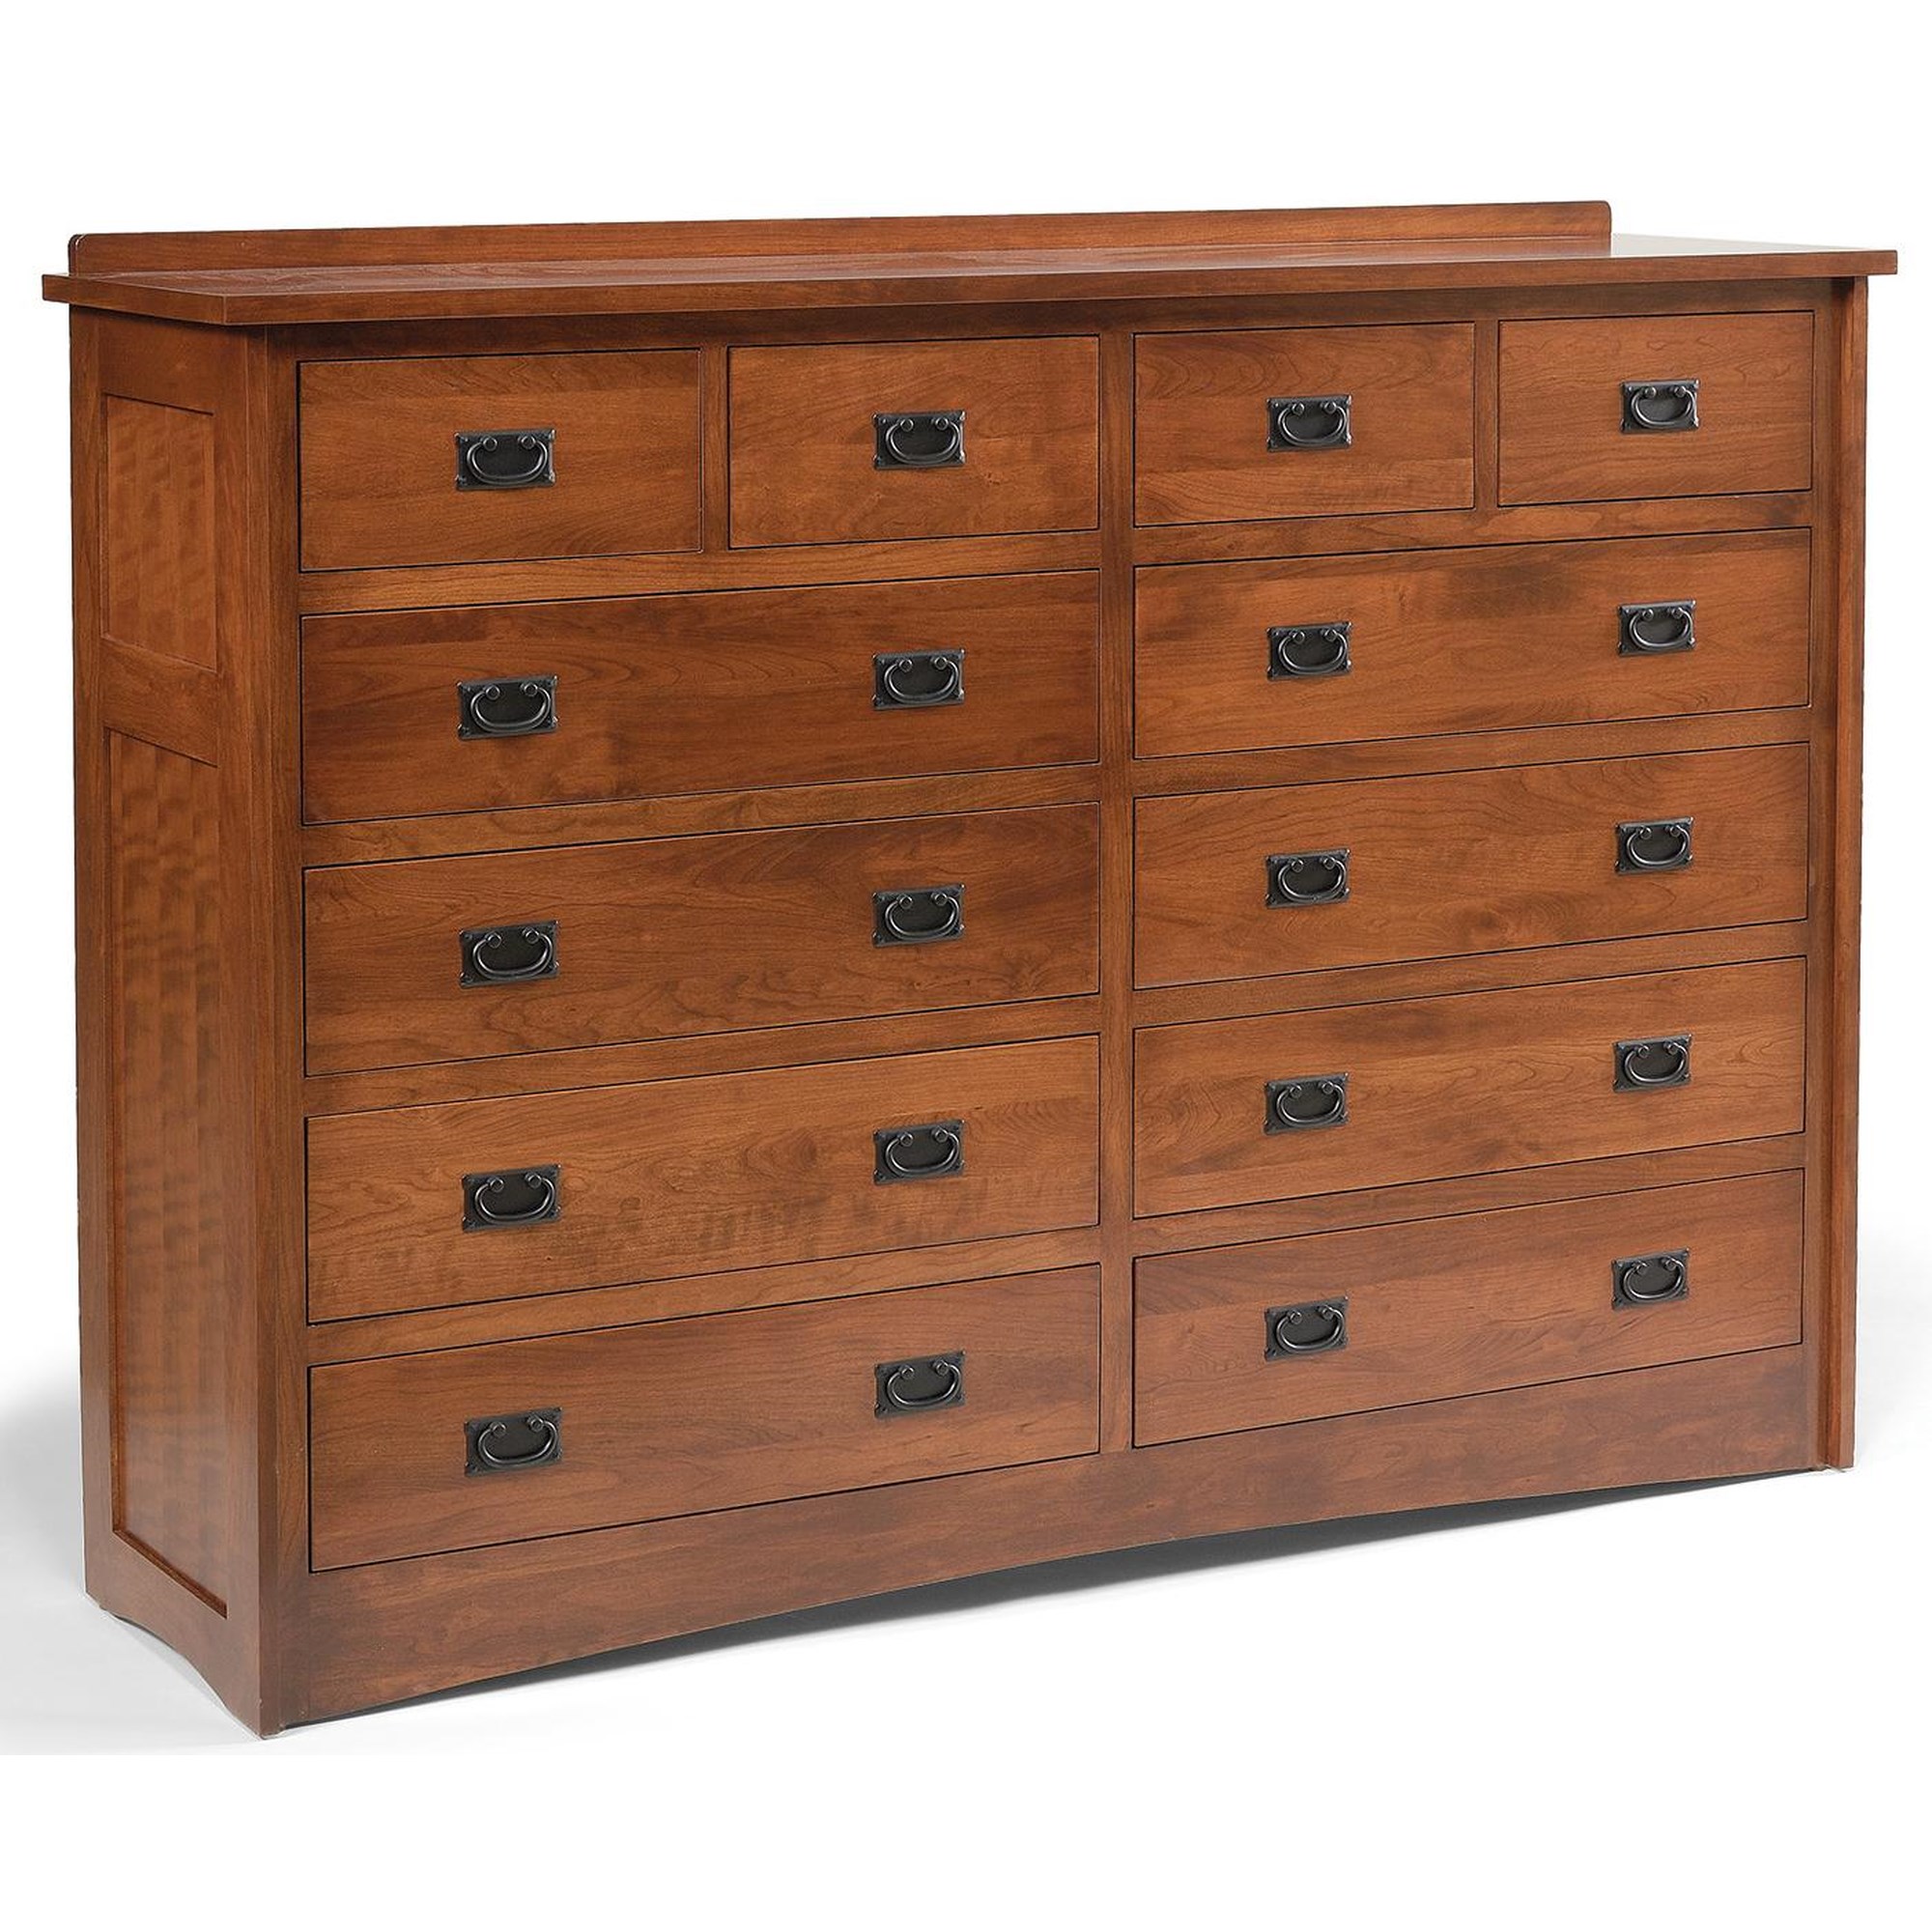 Daniel's Amish Mission 35-3142 12-Drawer Solid Wood Double Dresser